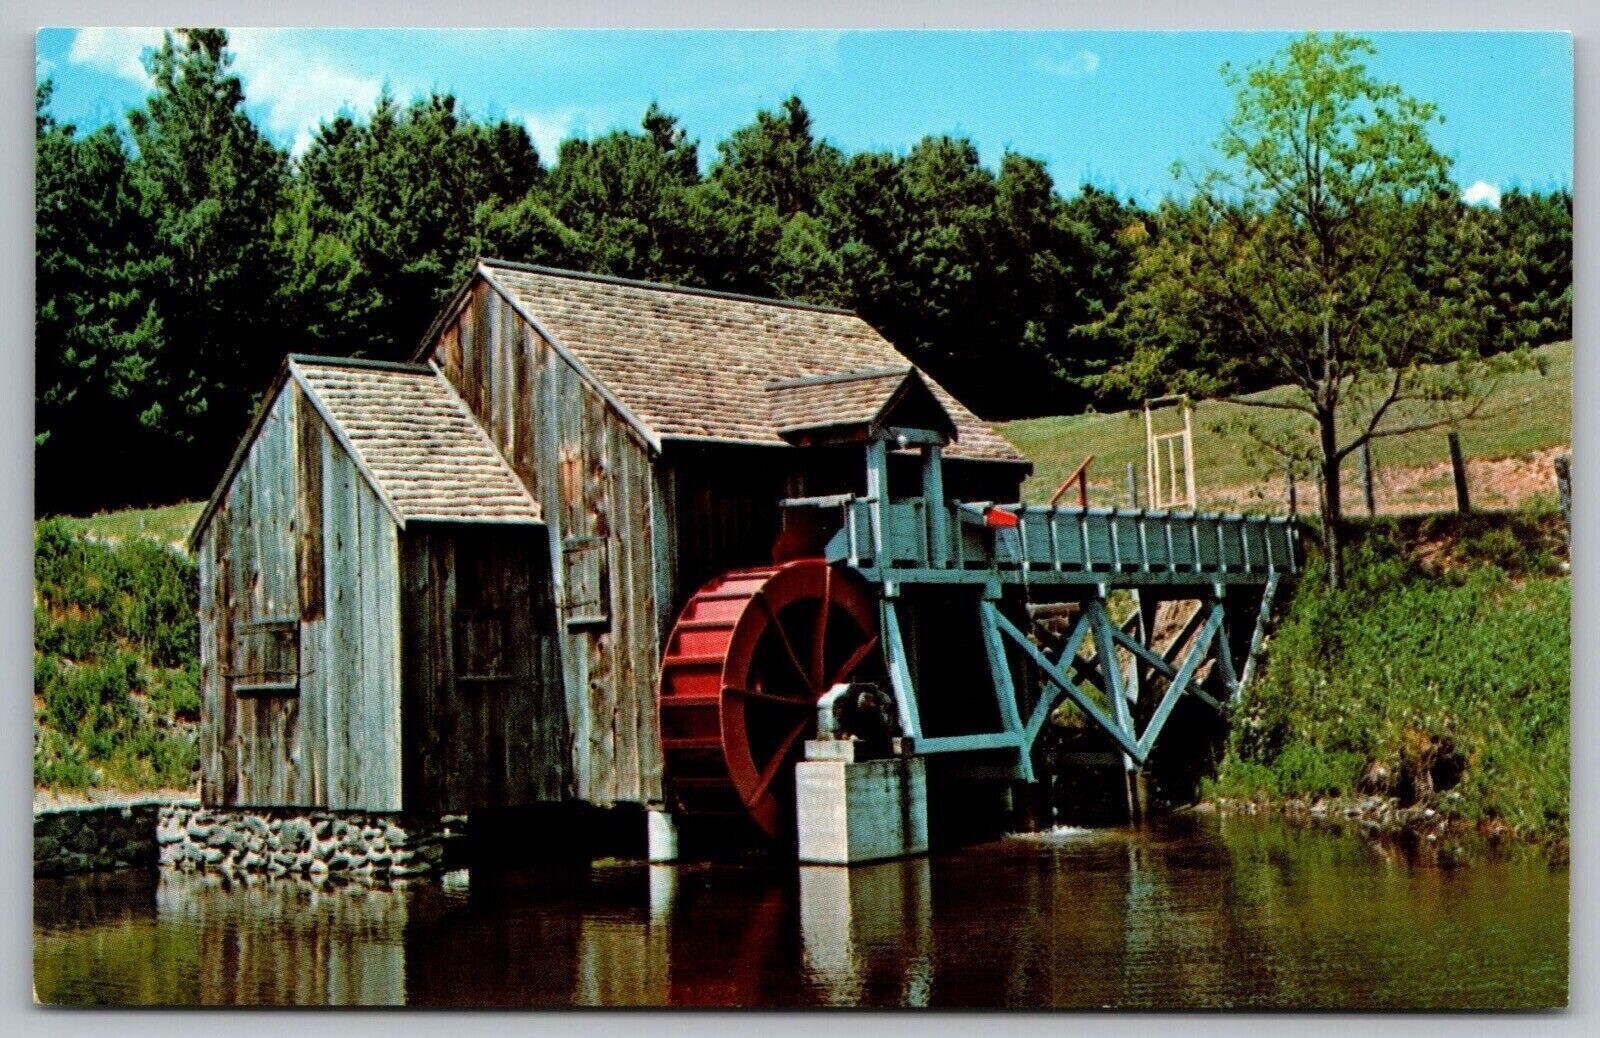 Guildhall Vermont Vt Old Mill And Water Wheel Photo By John Somers Unp Postcard